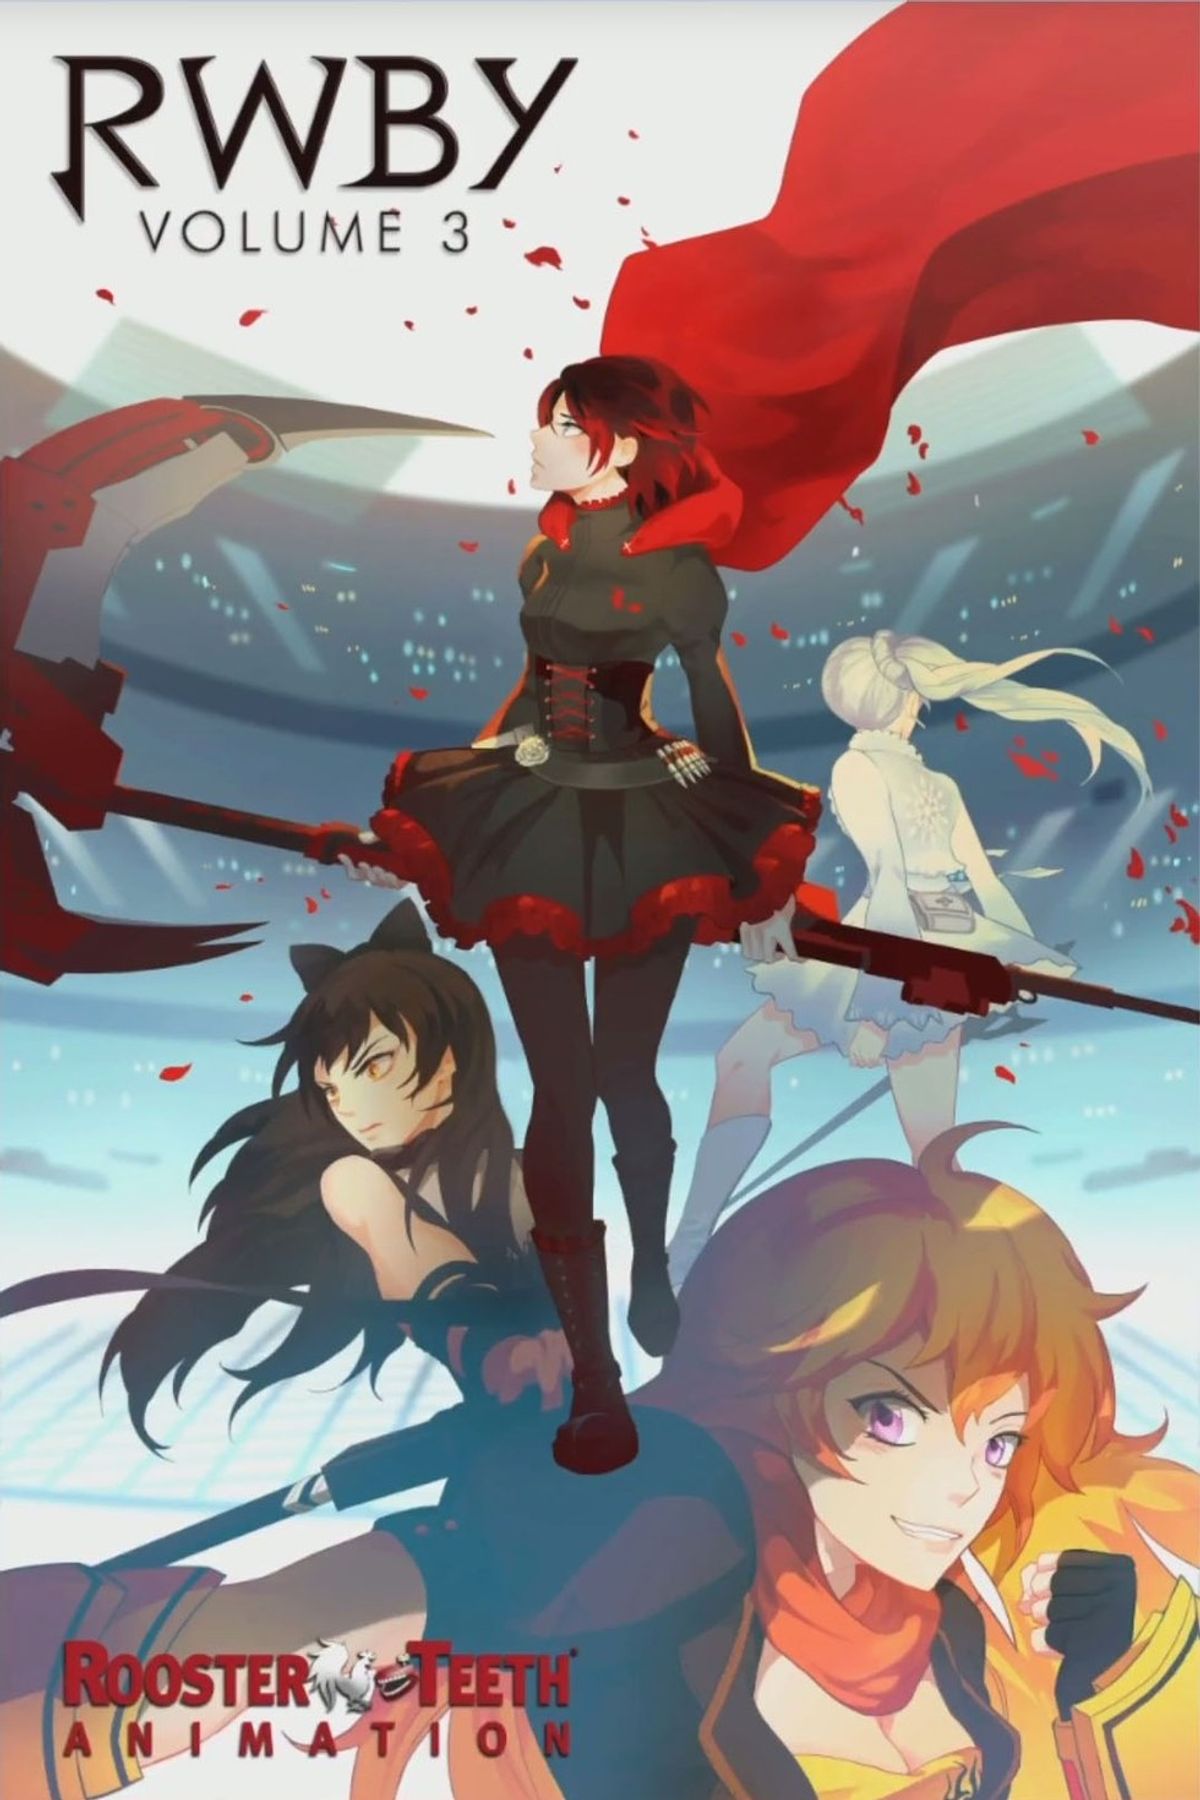 Keep Moving Forward: A Retrospect On 'RWBY' One Year After The Loss Of Monty Oum